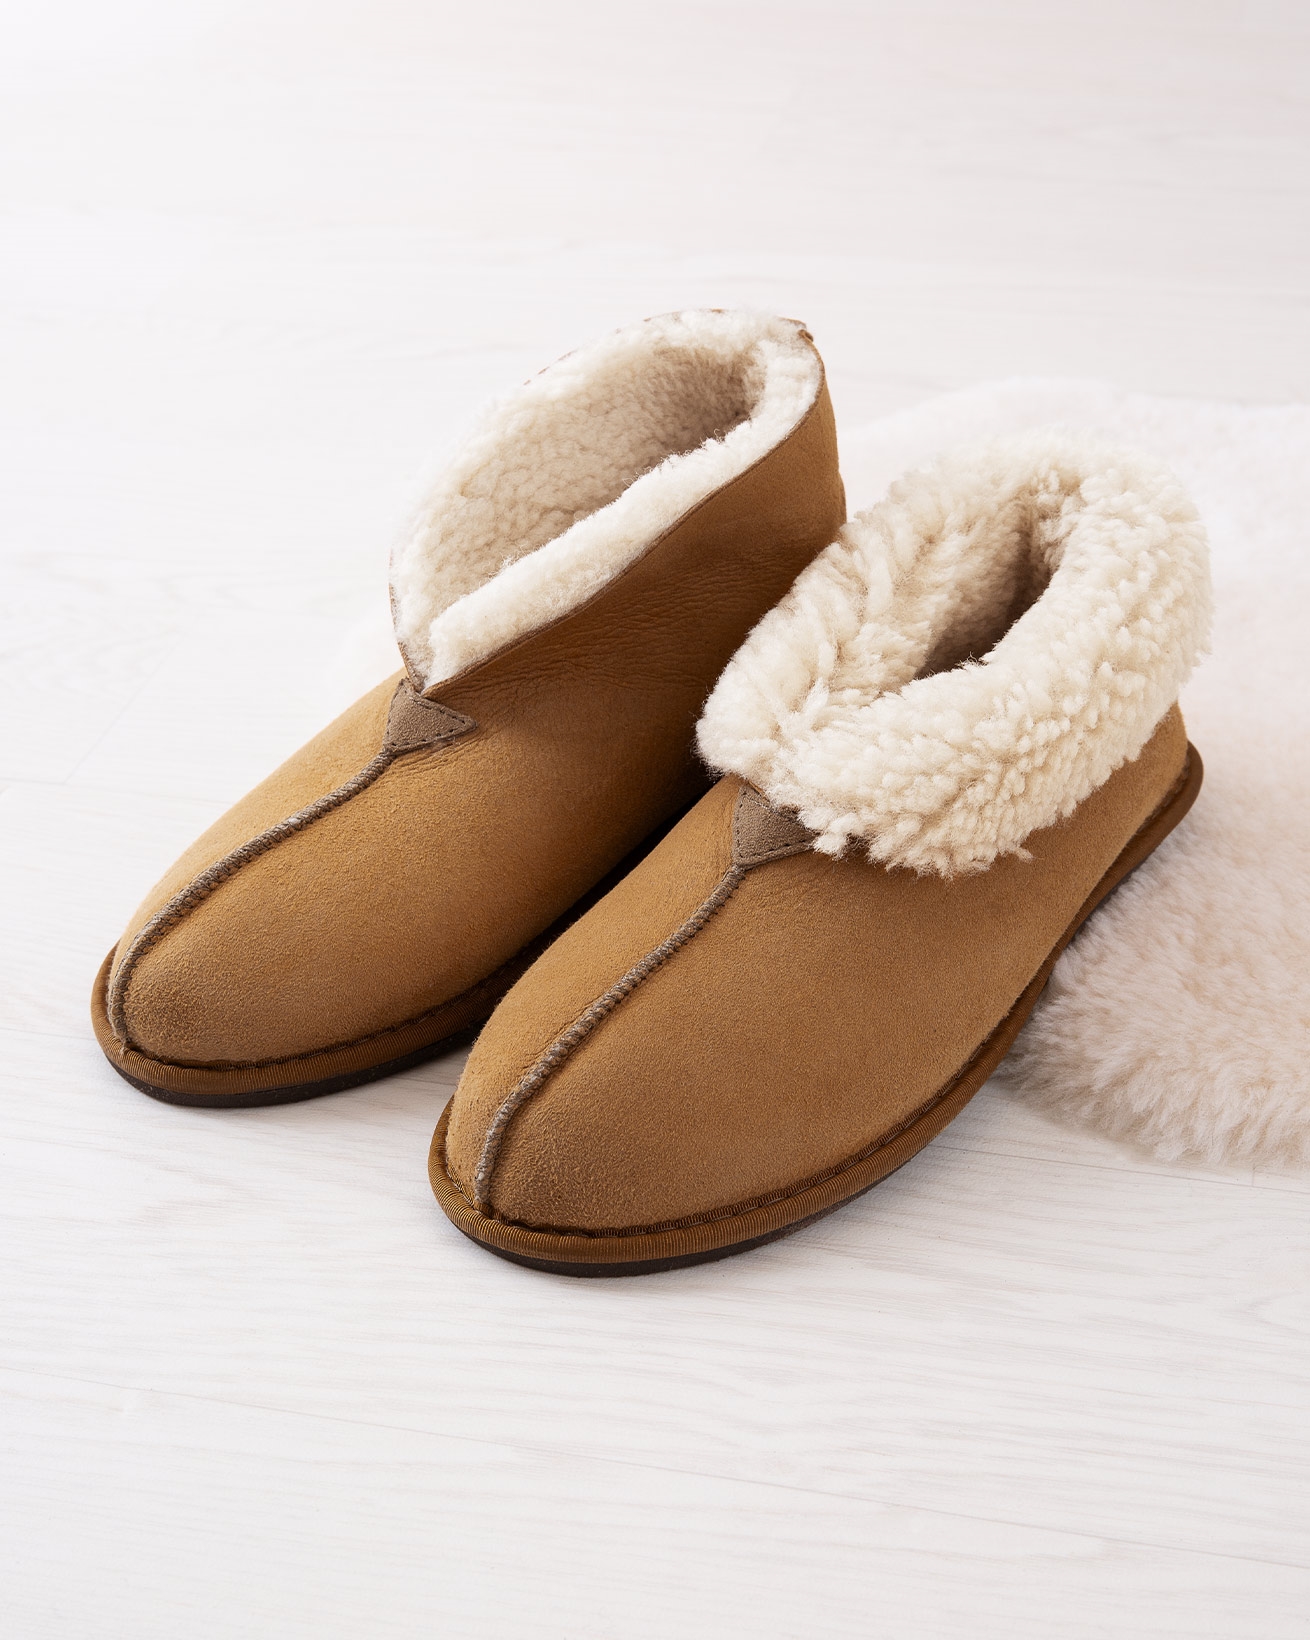 celtic company slippers